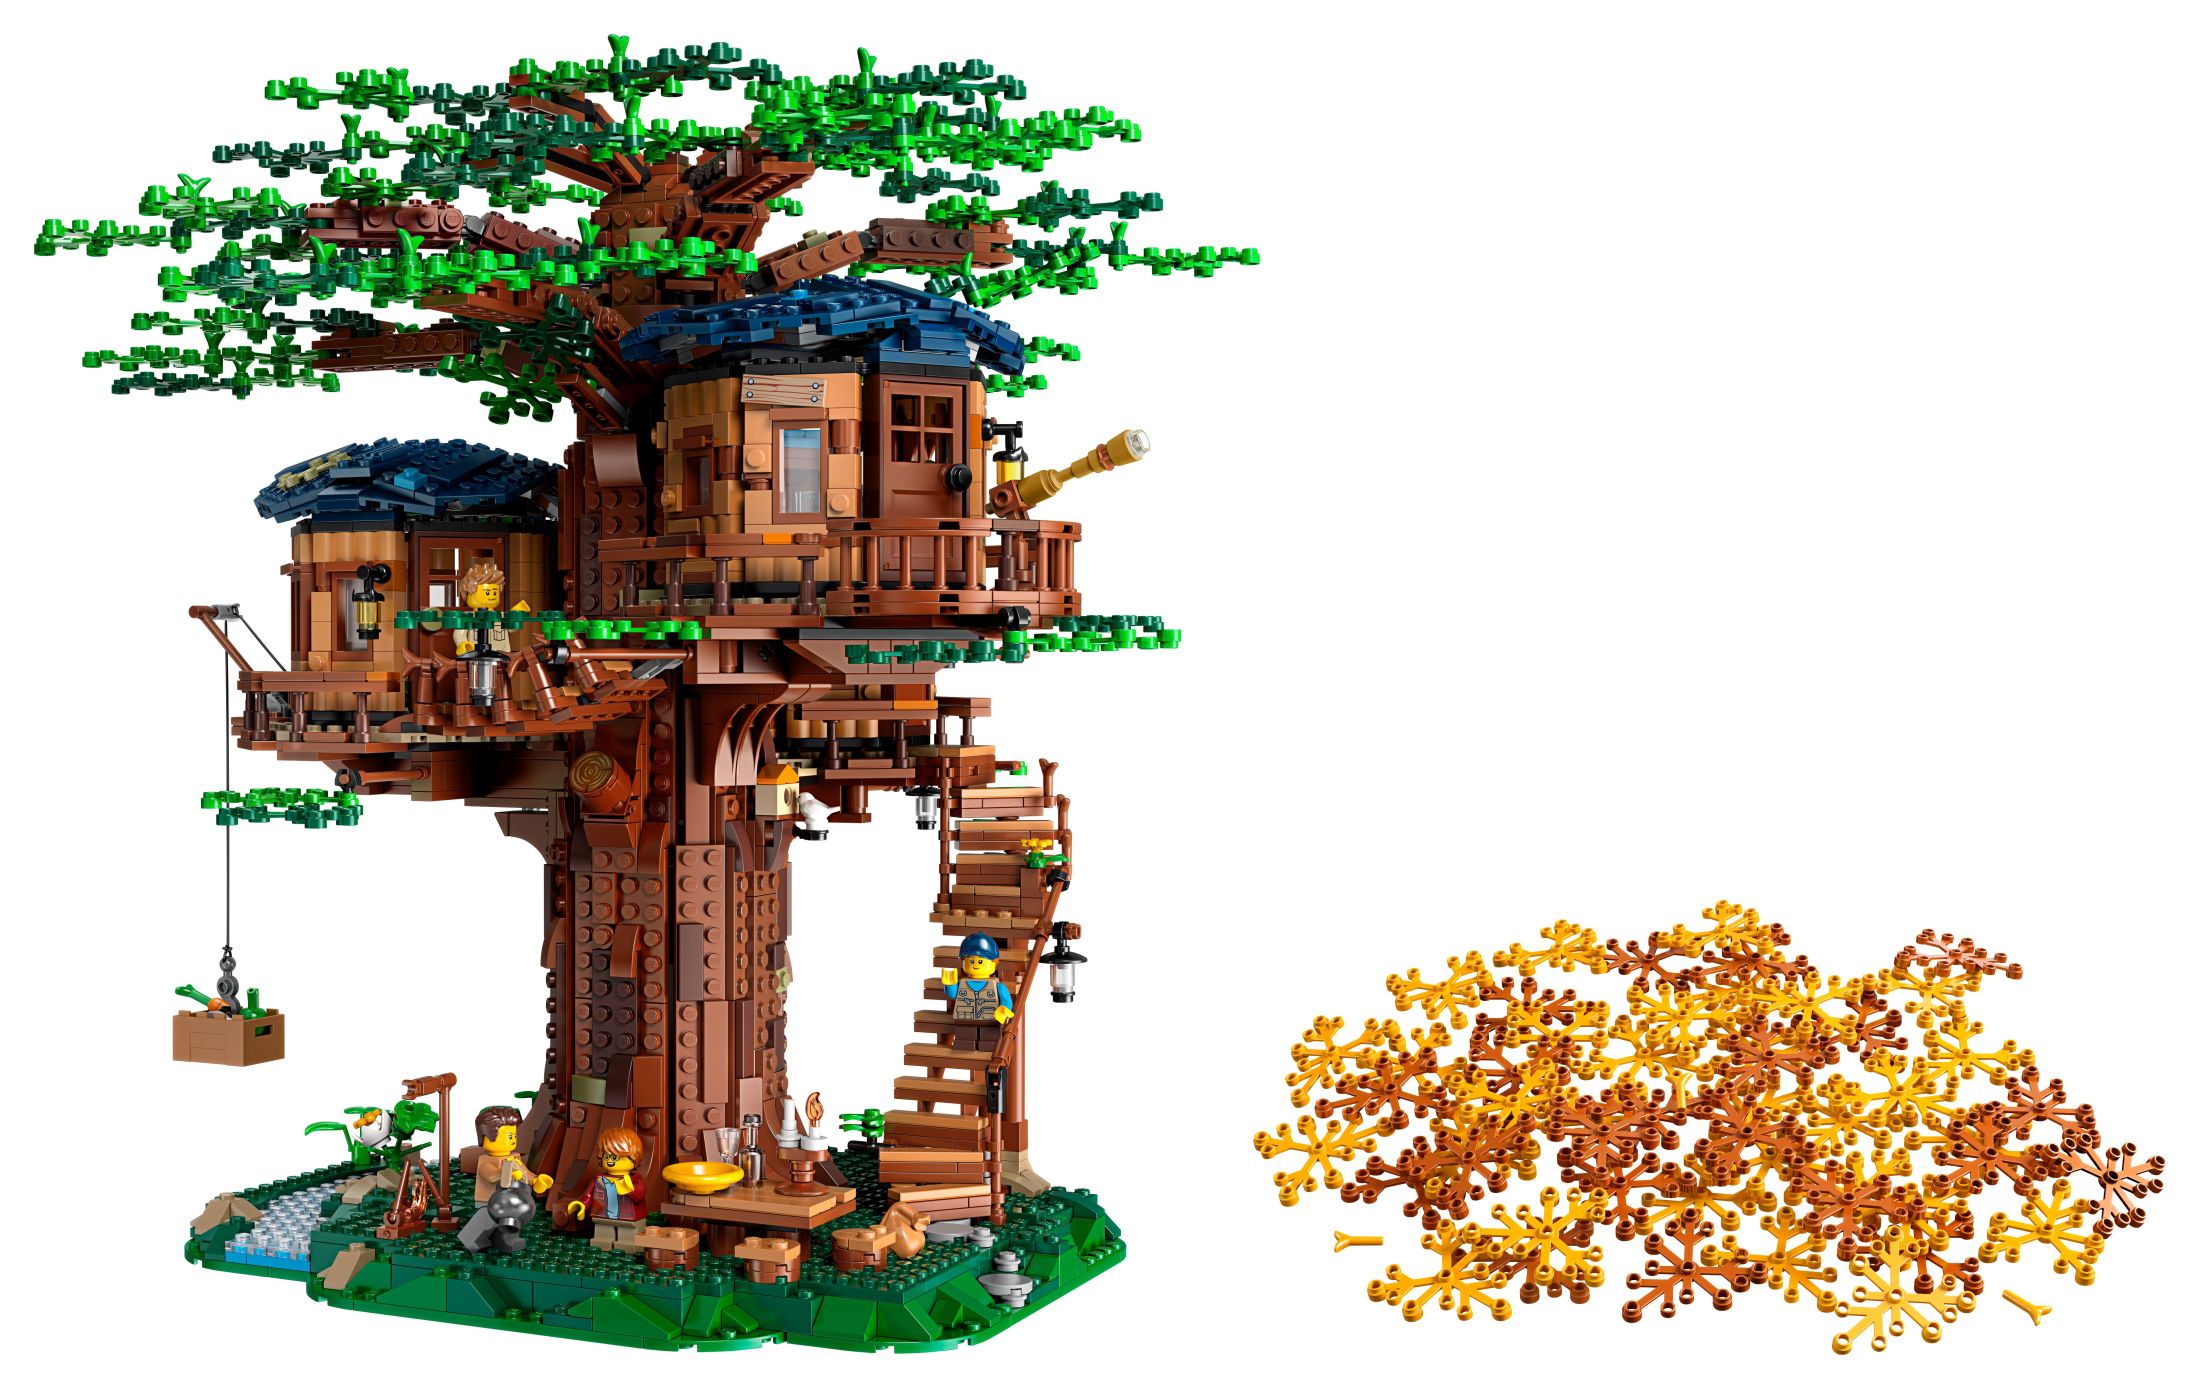 LEGO Ideas Tree House 21318, Model Construction Set for 16 Plus Year Olds with 3 Cabins, Interchangeable Leaves, Minifigures and a Bird Figure - image 5 of 9